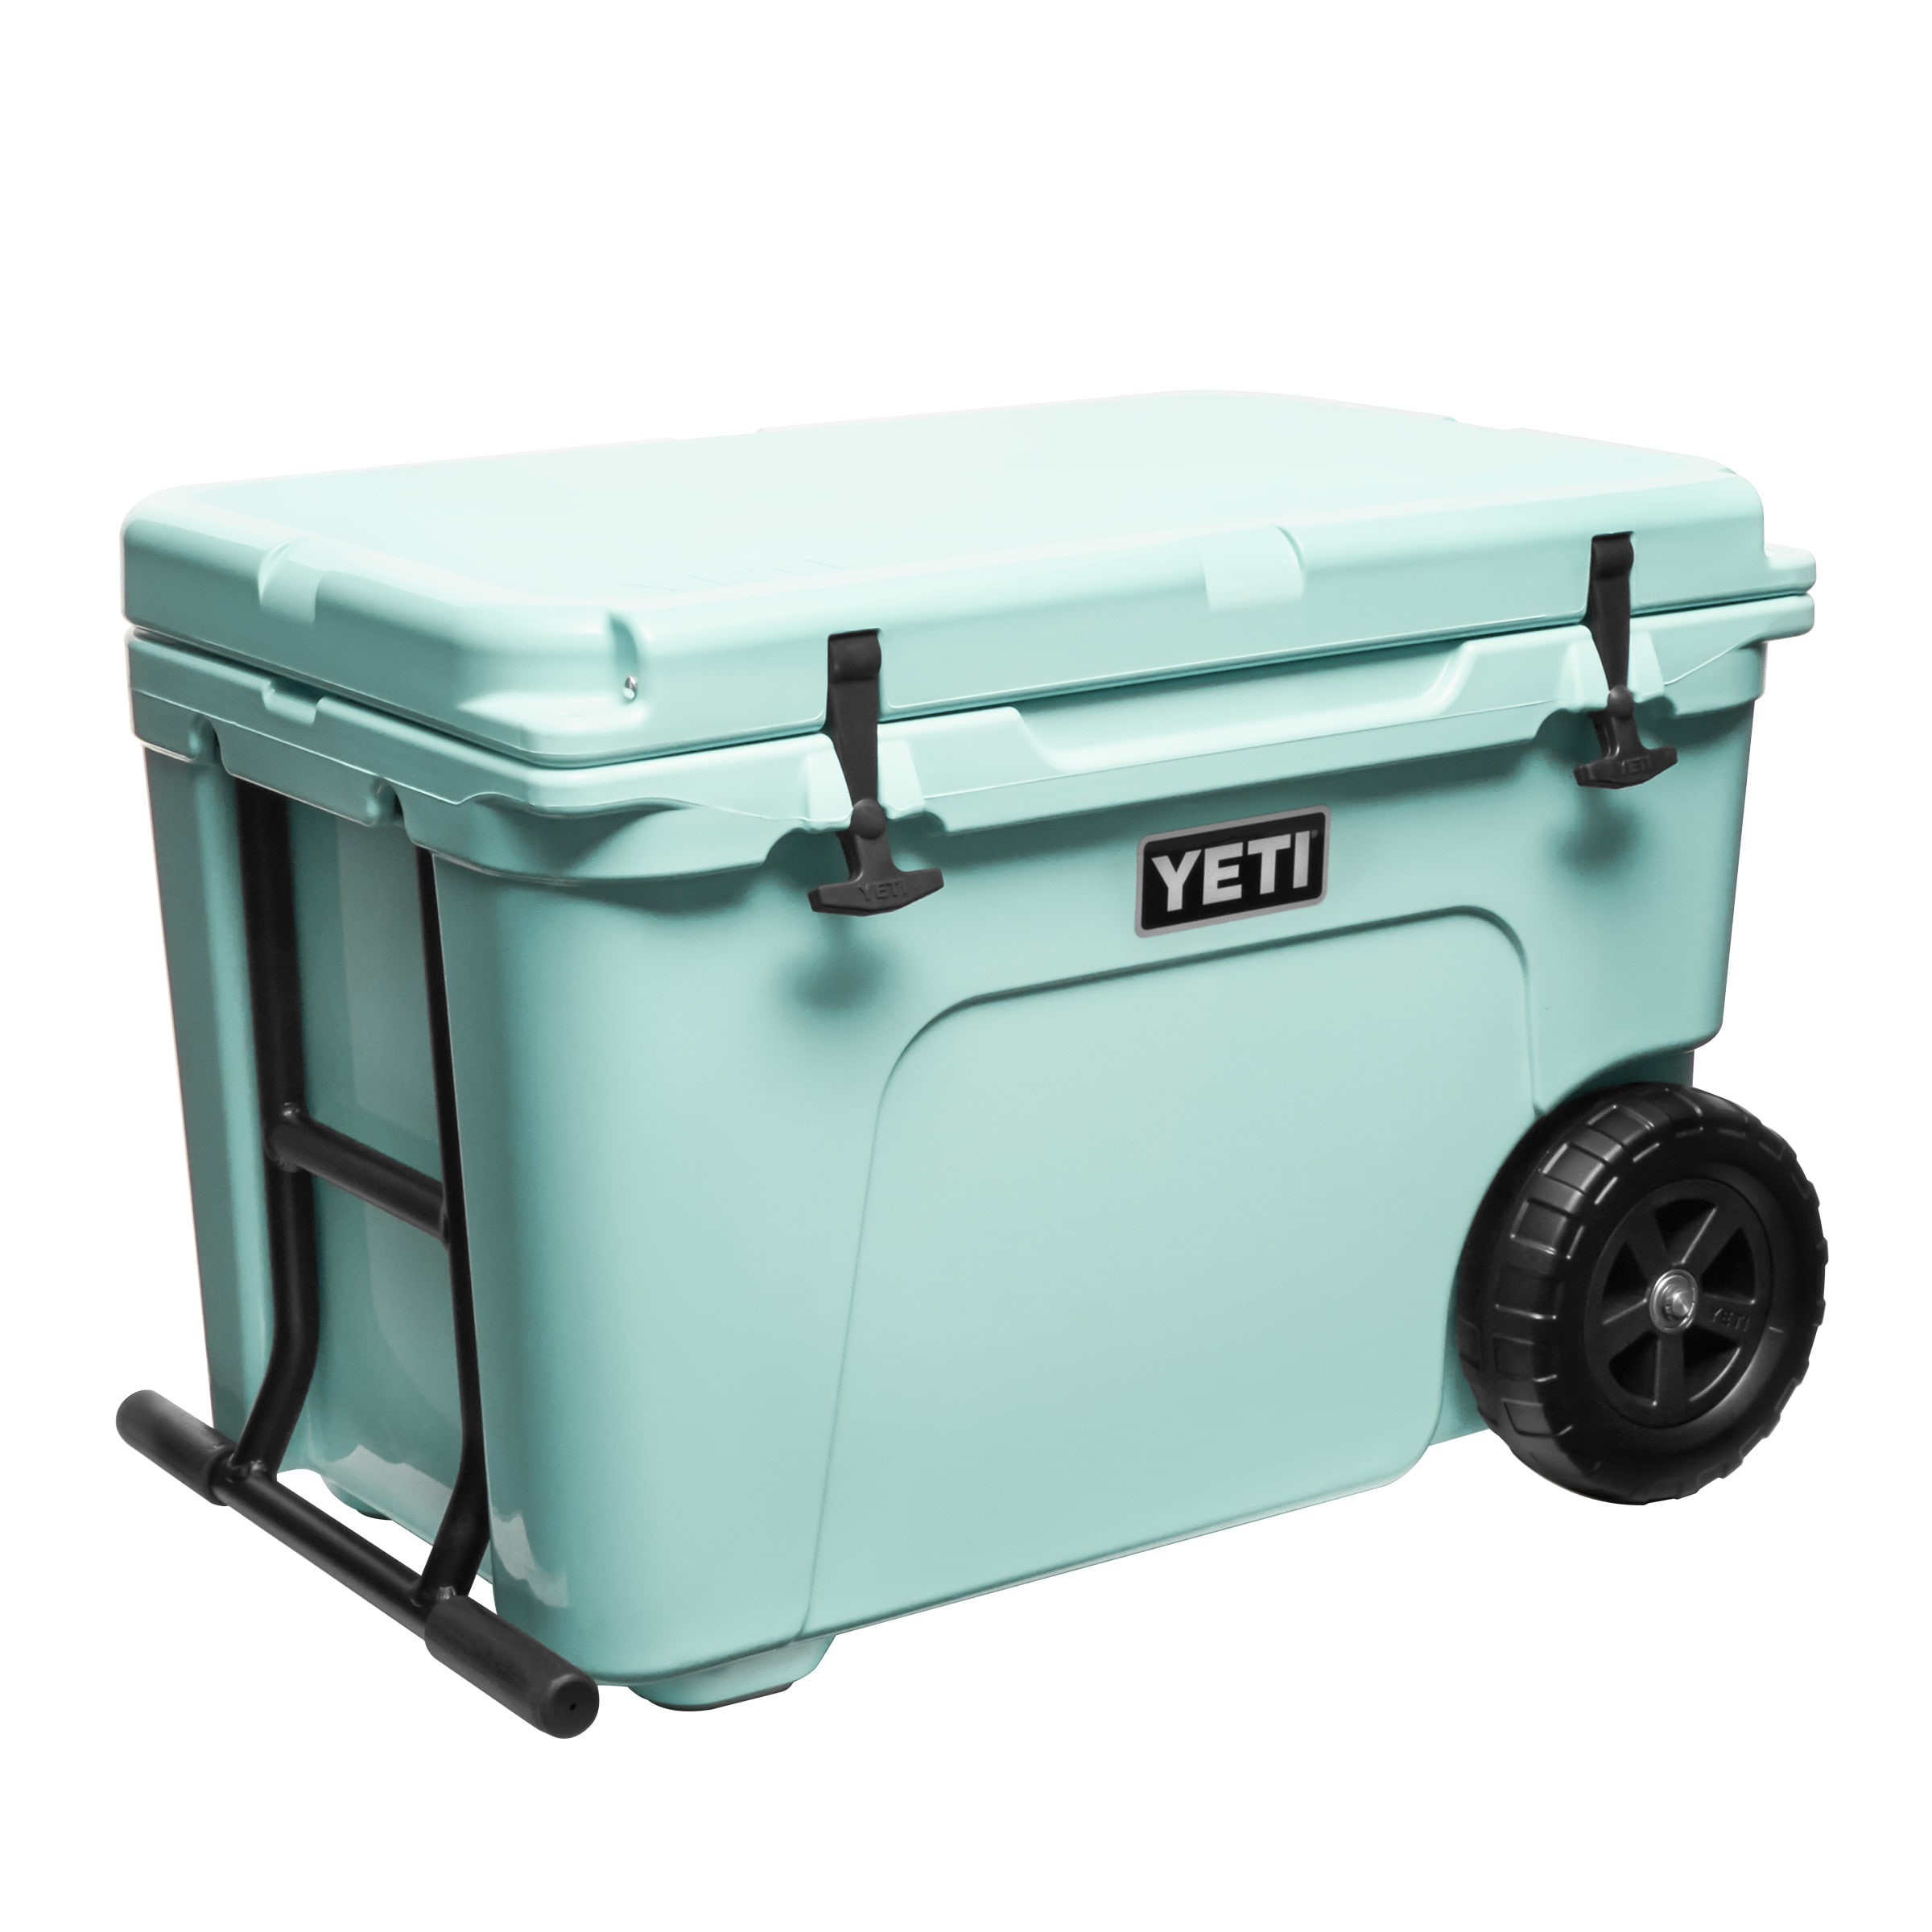 Tideline3D Cup Holder Compatible with YETI Tundra and Tundra Haul Wheeled  Cooler